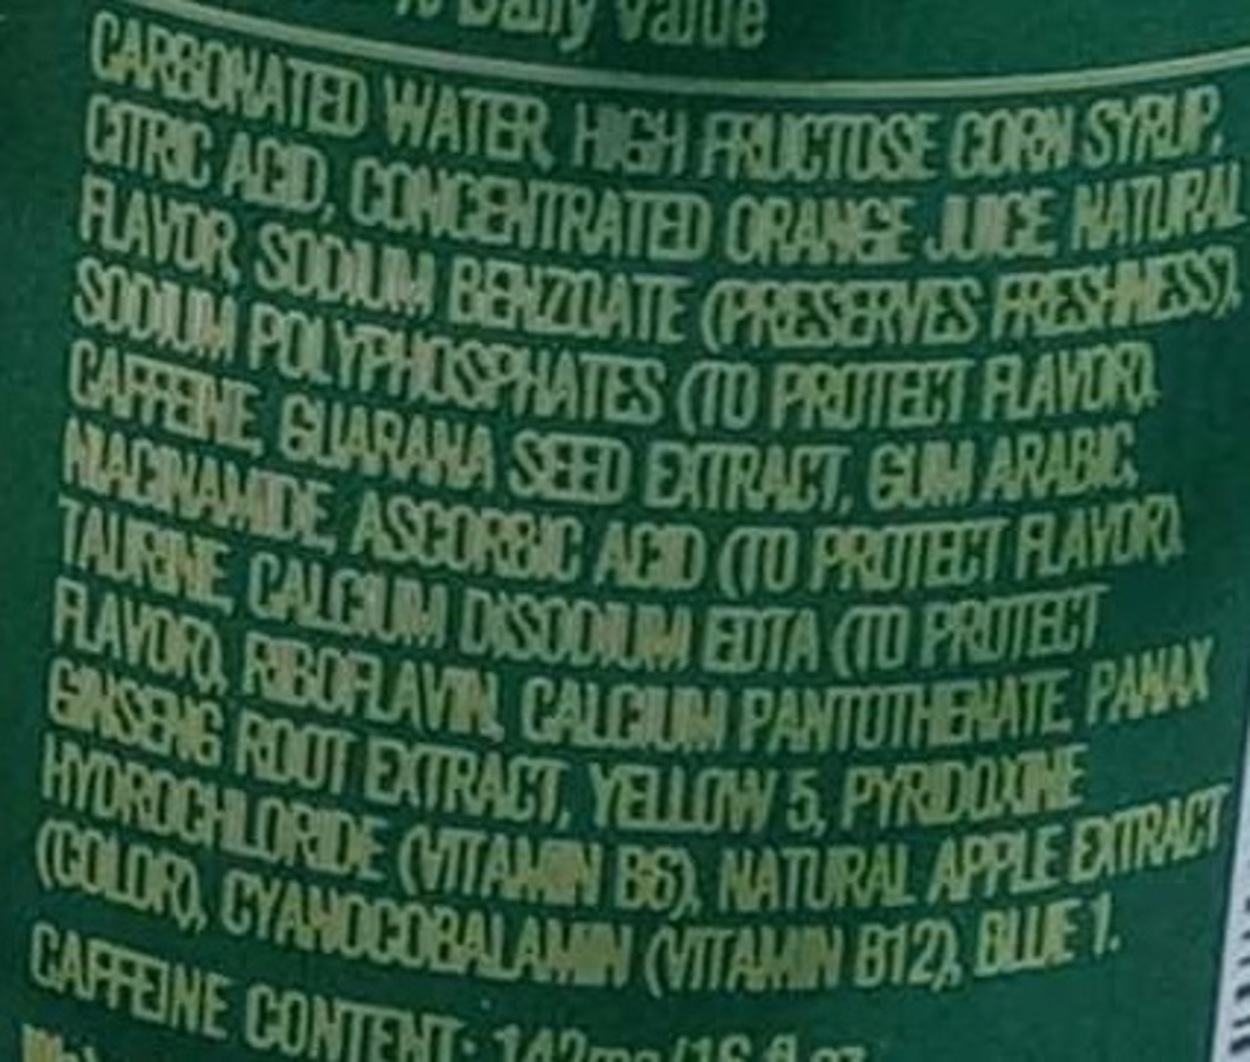 AMP Energy drink ingredients at the back of the can